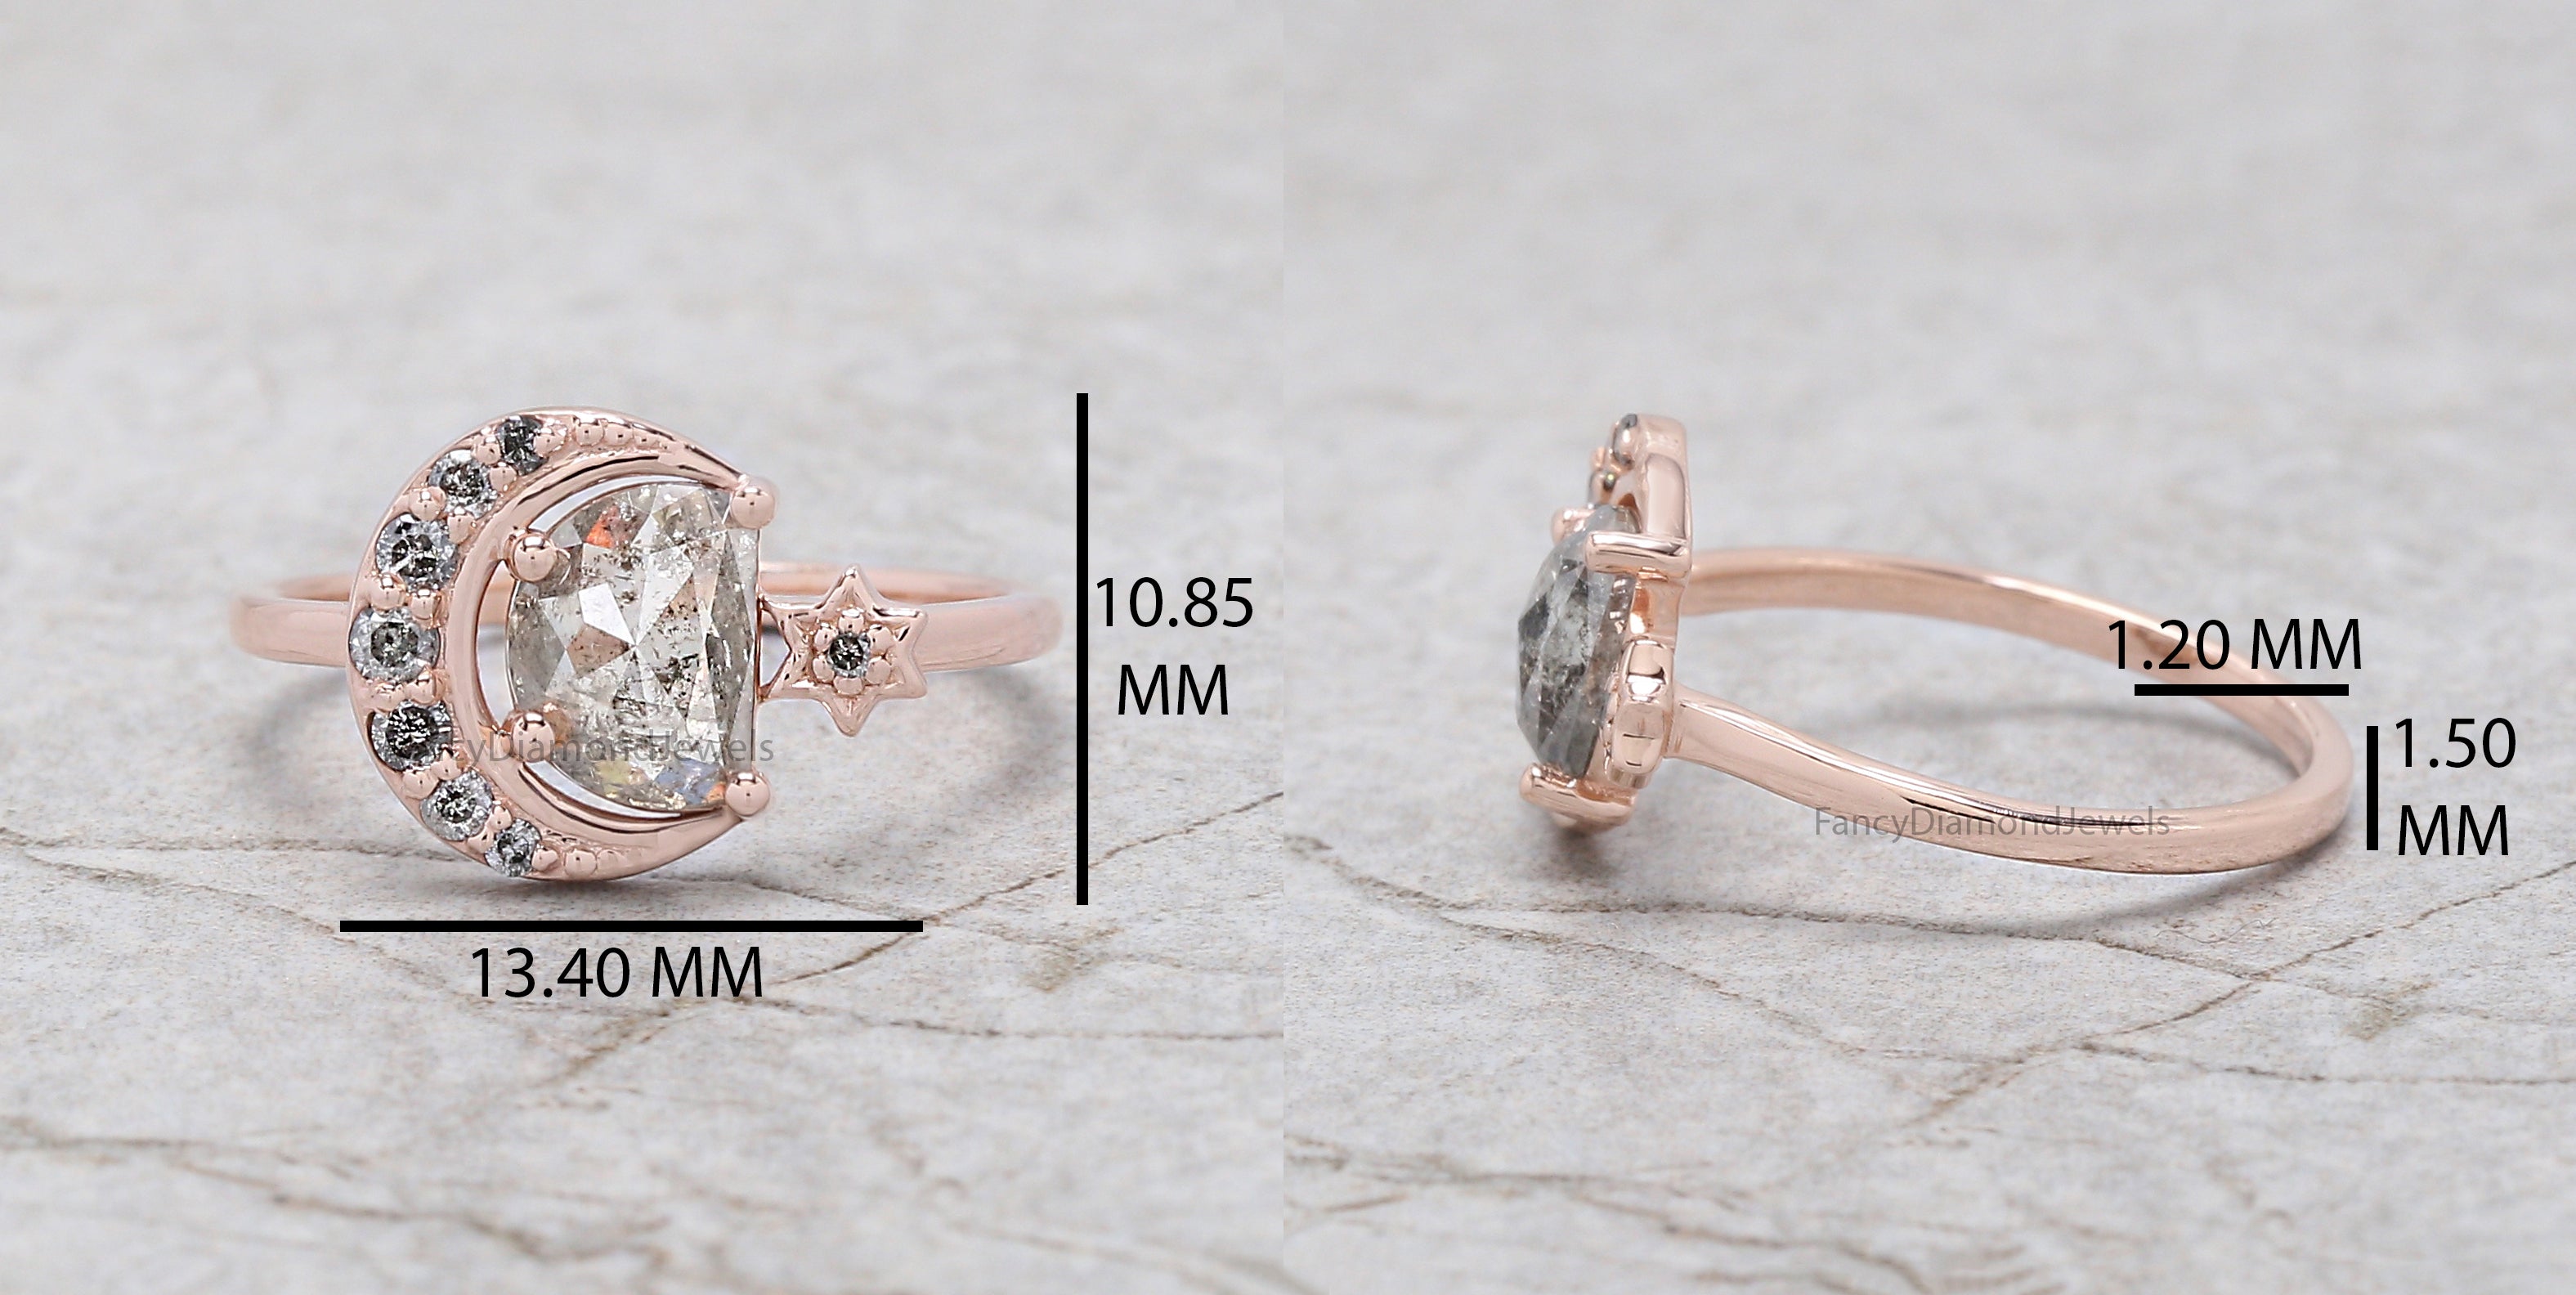 Half Moon Salt And Pepper Diamond Ring 0.94 Ct 7.30 MM Half Moon Diamond Ring 14K Solid Rose Gold Silver Engagement Ring Gift For Her QN725